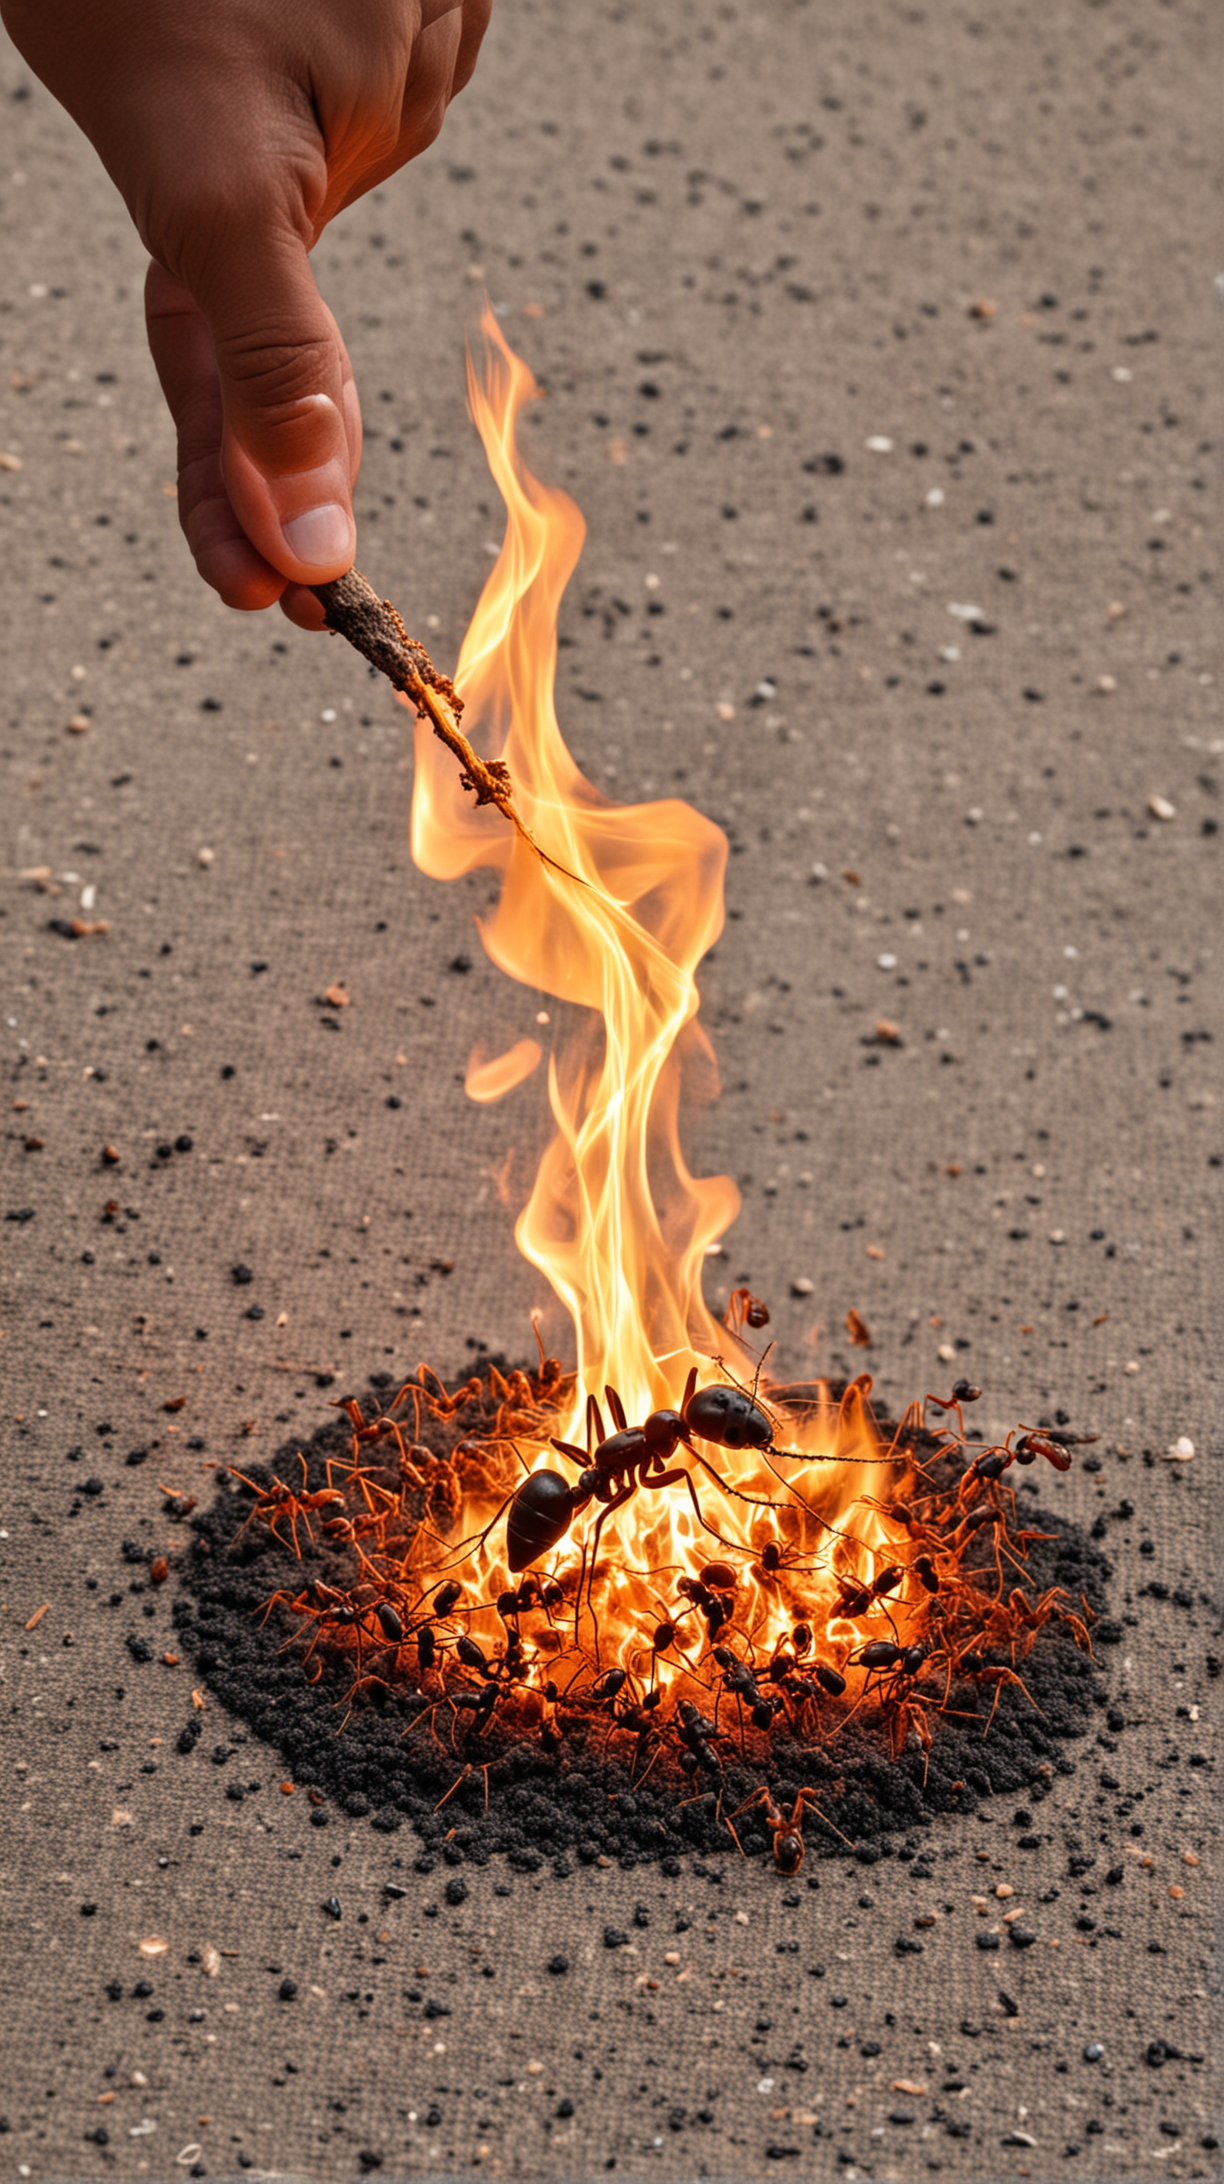 Man Burning Ant with Fire Controversial Act of Insect Aggression